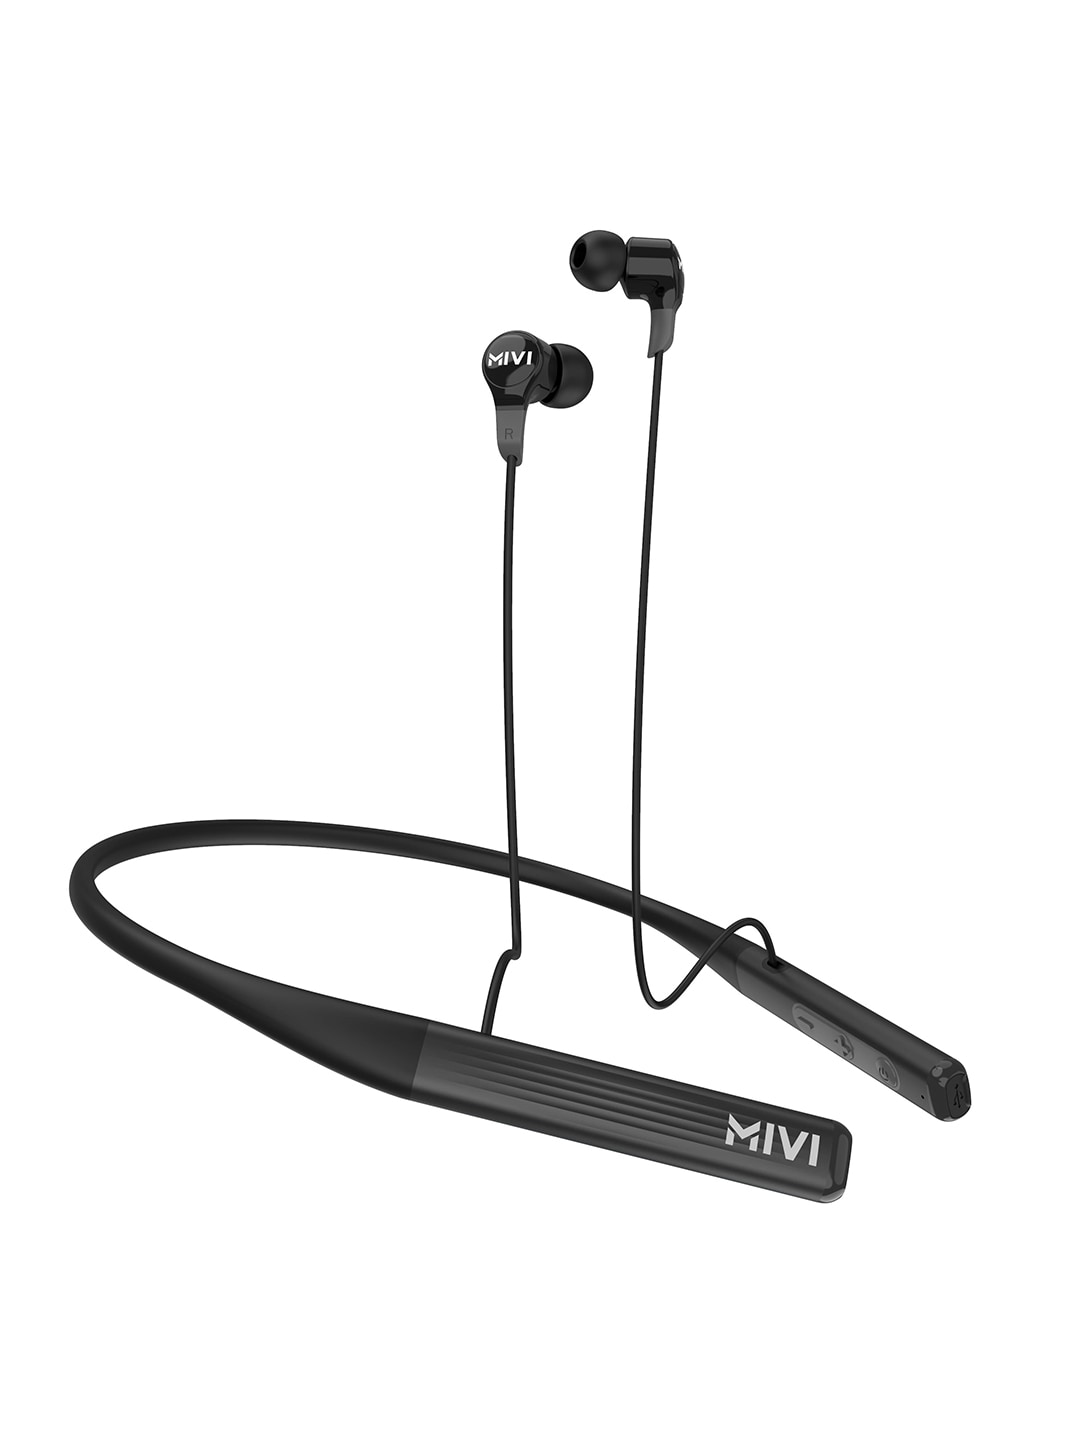 mivi Collar 2B Wireless Earphones with Fast Charging - Black Price in India